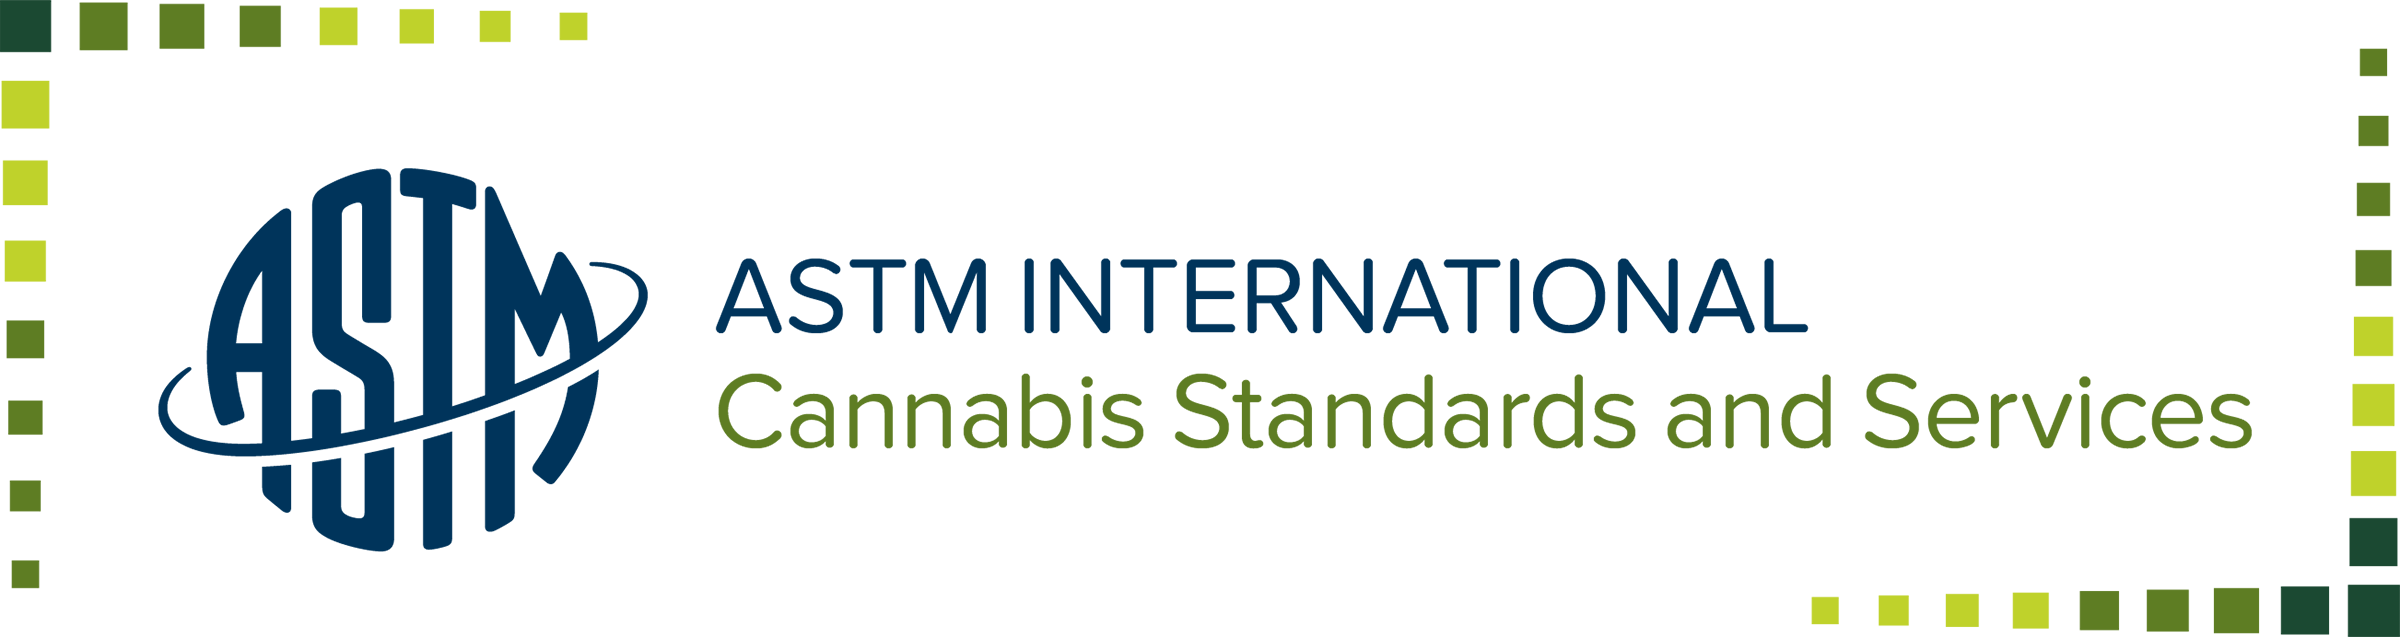 ASTM International Cannabis Standards and Services